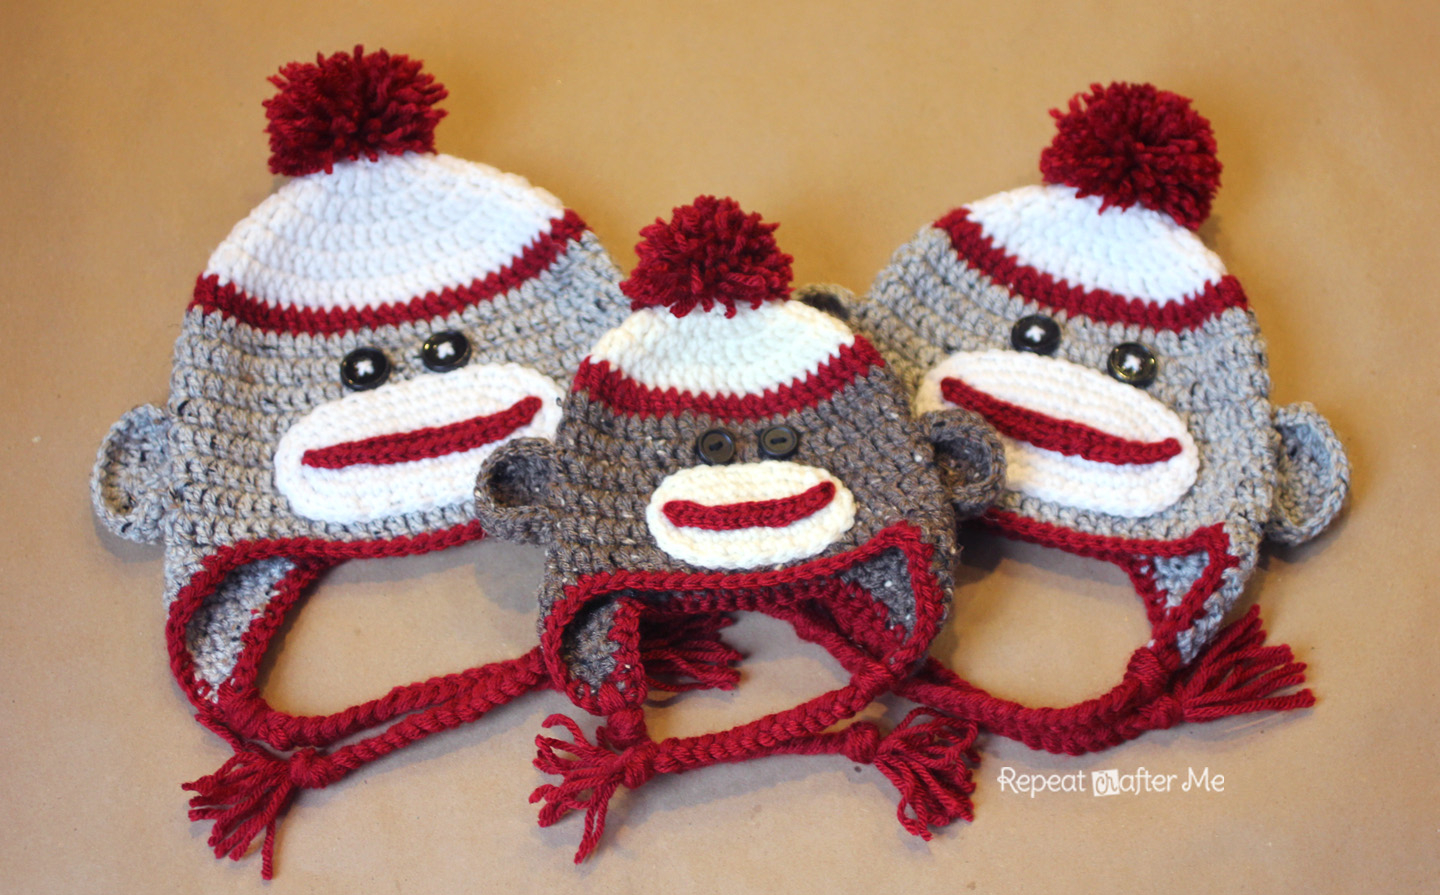 Repeat Crafter Me Crochet Owl Hat Pattern Crochet Sock Monkey Hat Pattern Repeat Crafter Me